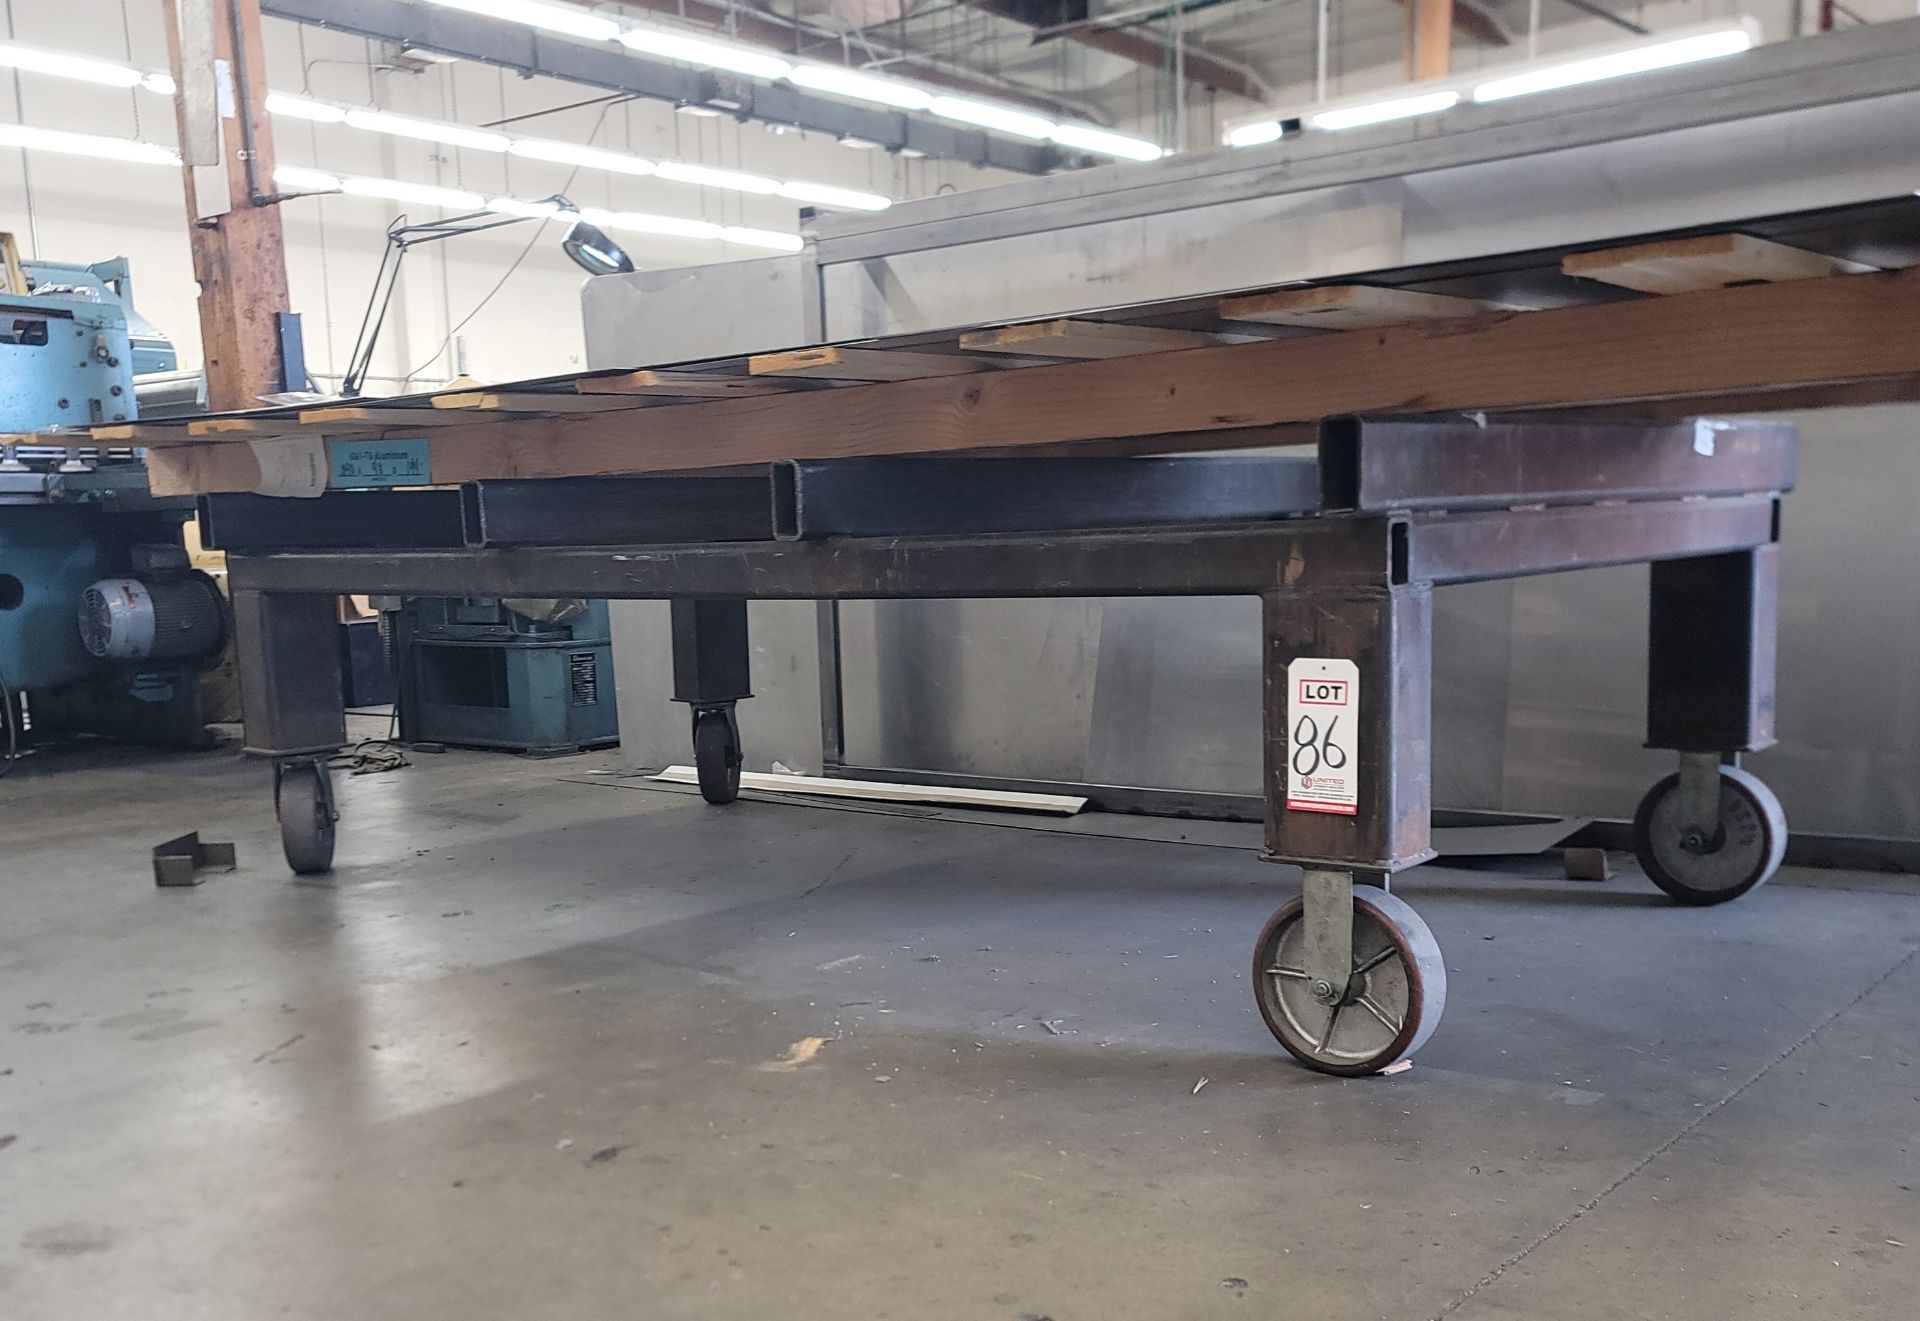 HEAVY DUTY MATERIAL CART FOR OVERSIZED PALLETS OF SHEET STOCK, 90" X 50", CONTENTS NOT INCLUDED